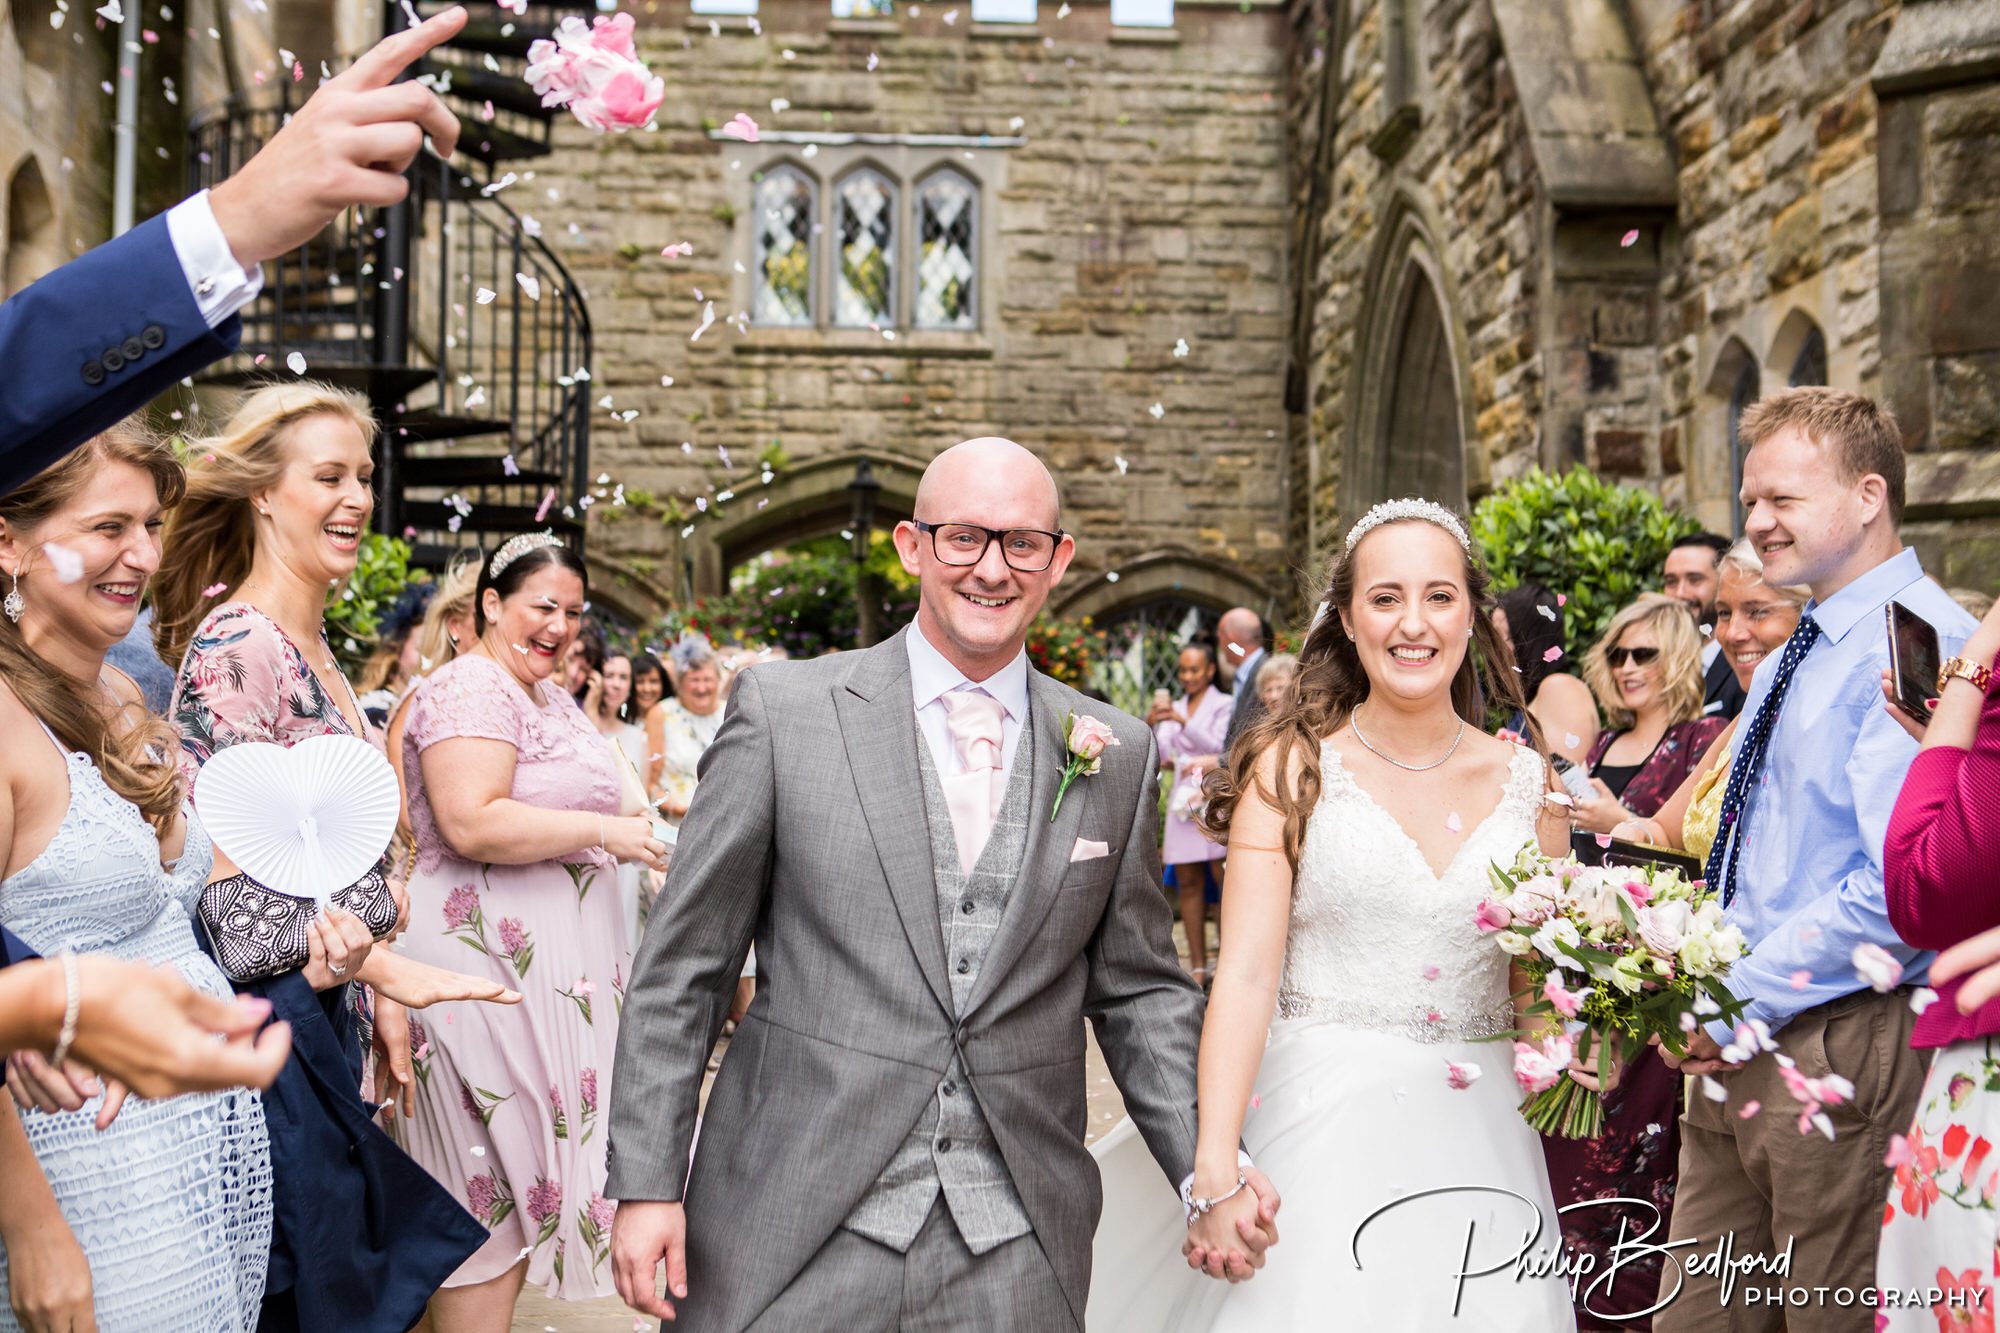 Relaxed Wedding Photograph of Bride & Groom Walking through hotel Grounds throwing Confetti